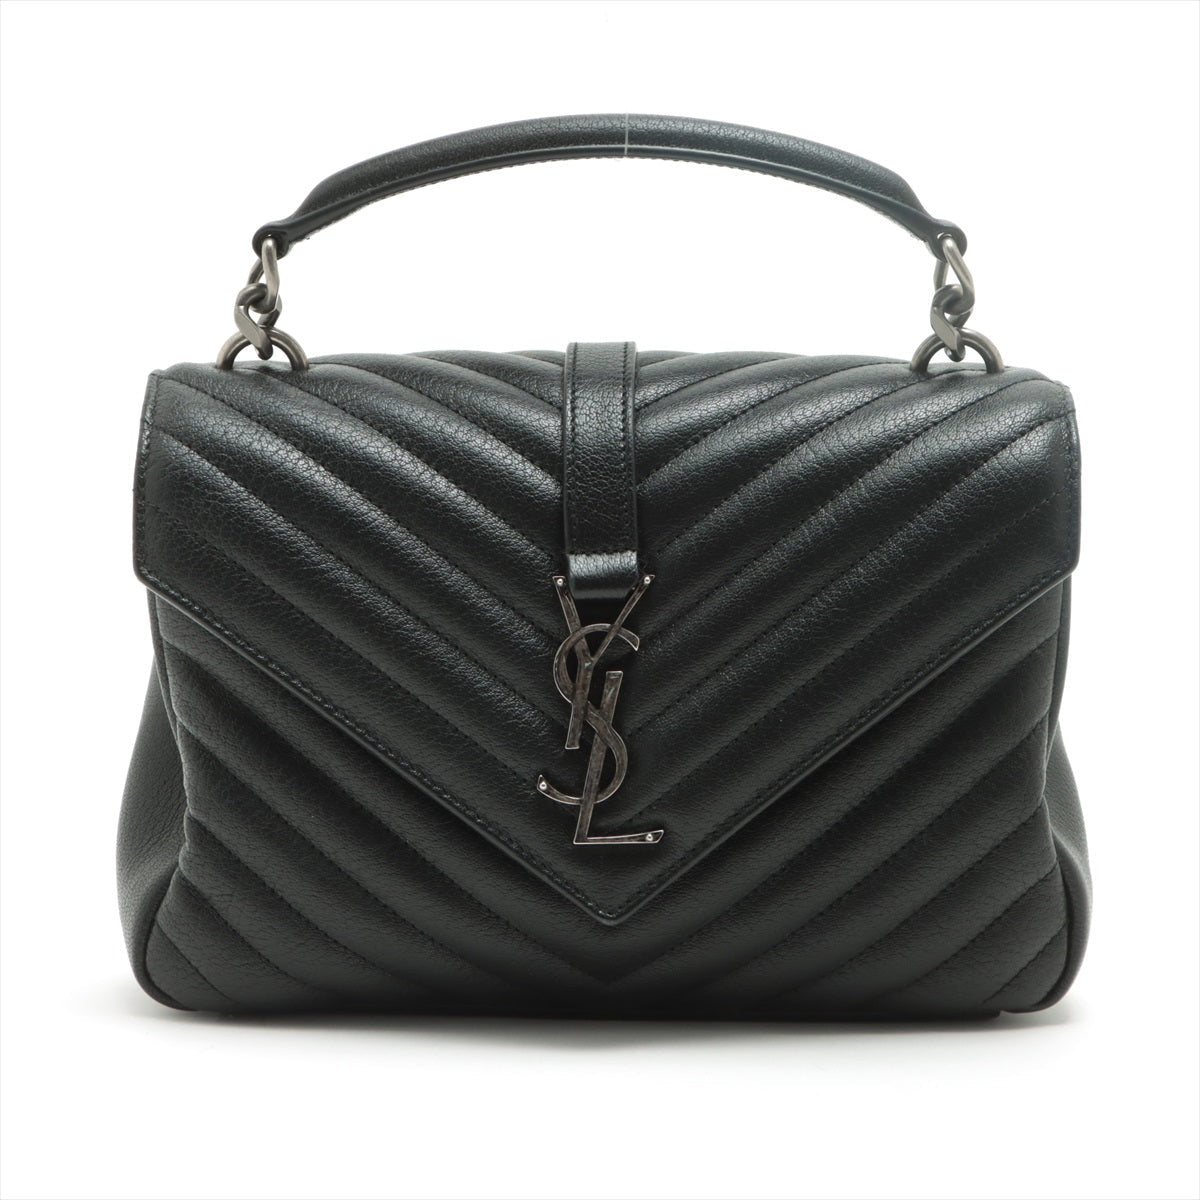 YSL - Saint Laurent Purse -LOULOU MEDIUM CHAIN BAG IN QUILTED Y LEATHER